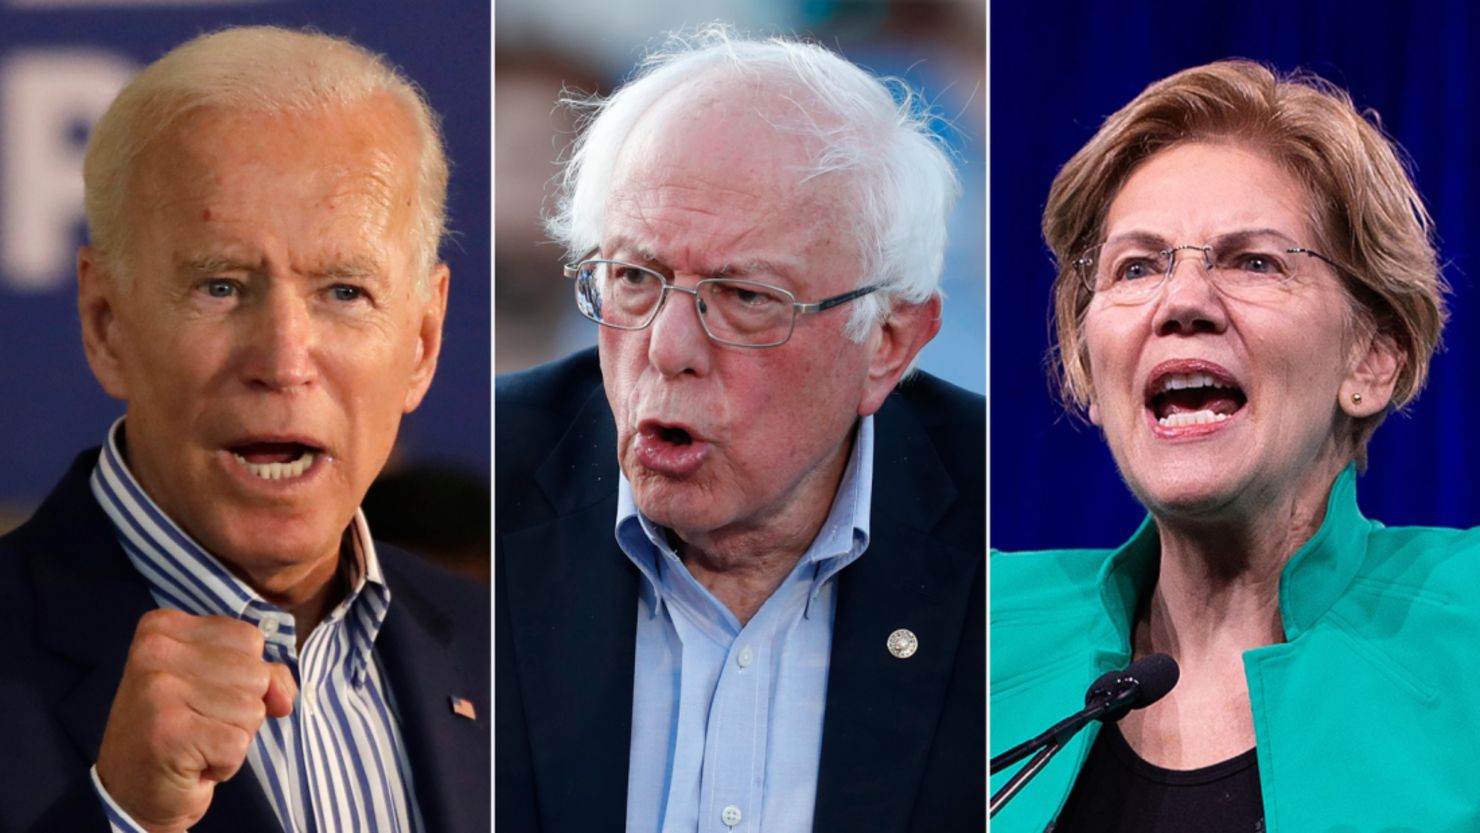 New Hampshire race profile: 2020 candidates for president